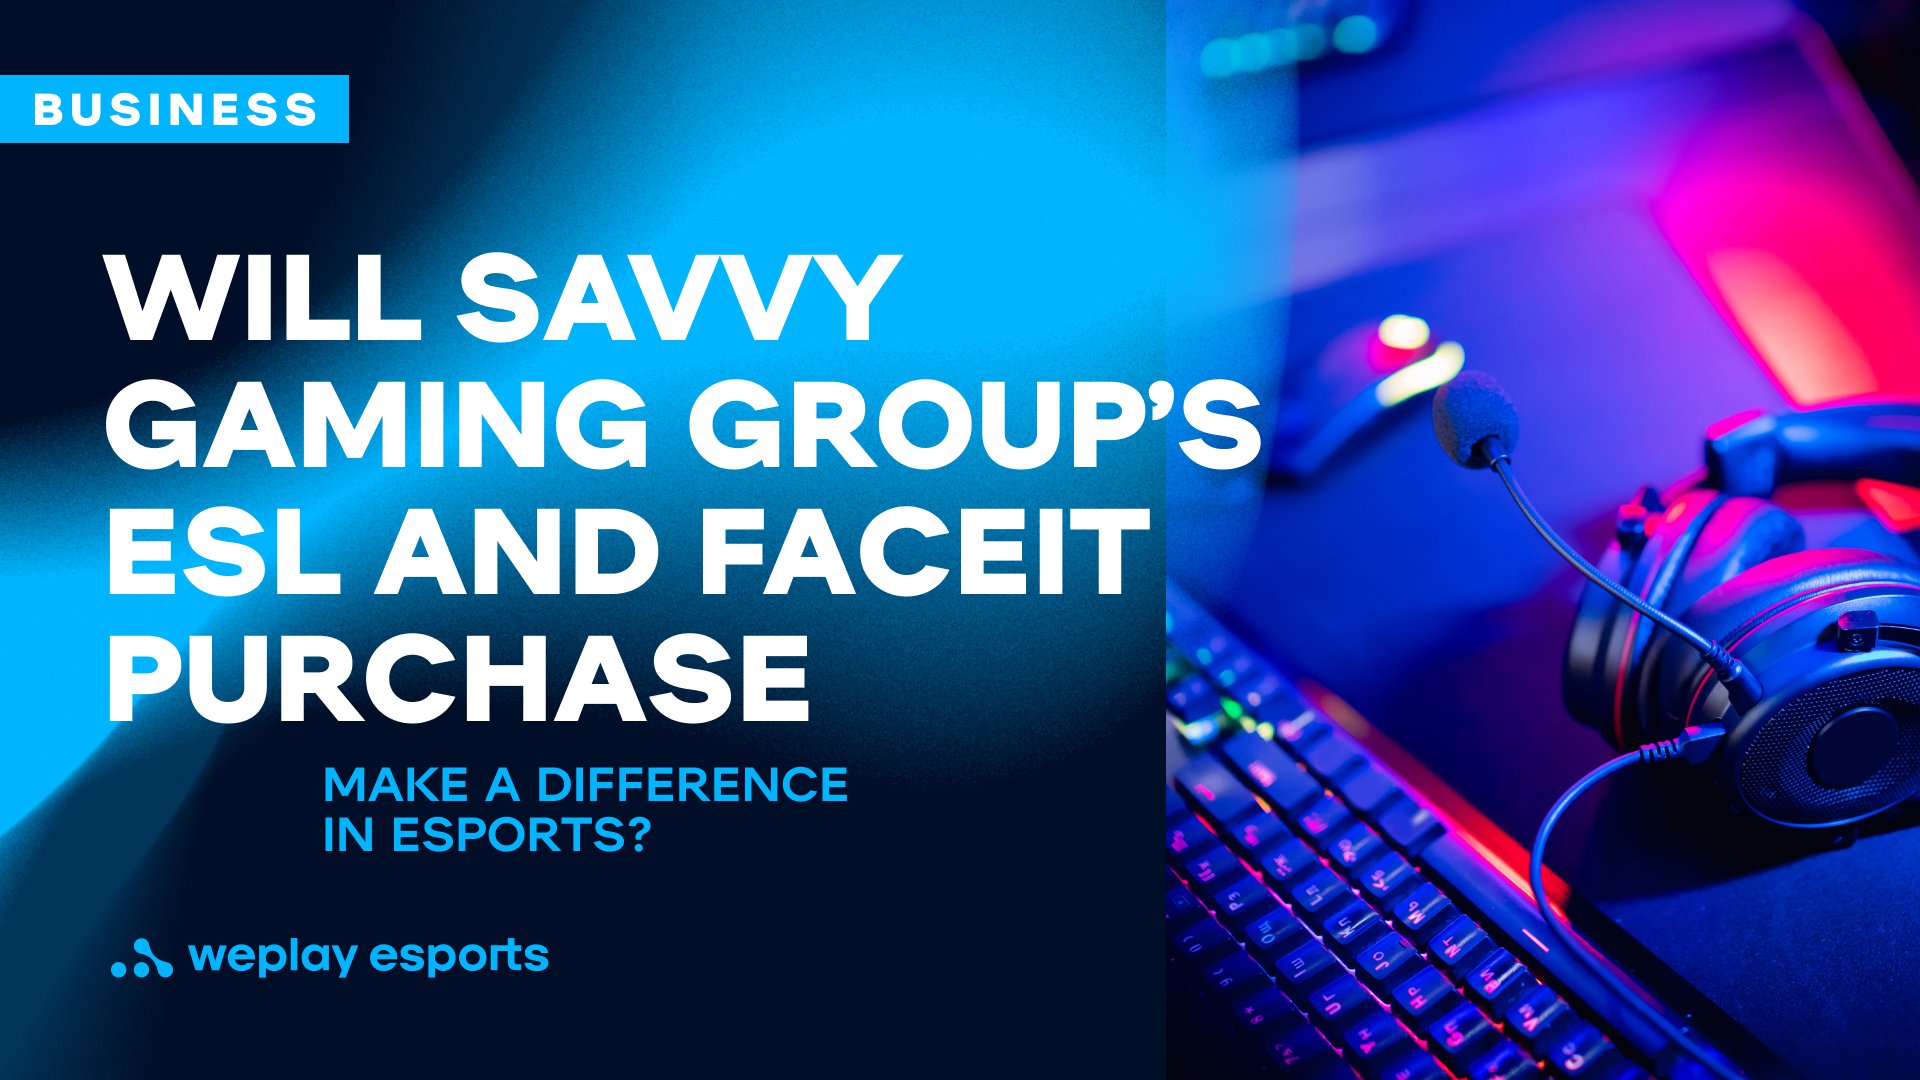 Will Savvy Gaming Group’s ESL and FACEIT purchase make a difference in esports? Credit: WePlay Holding